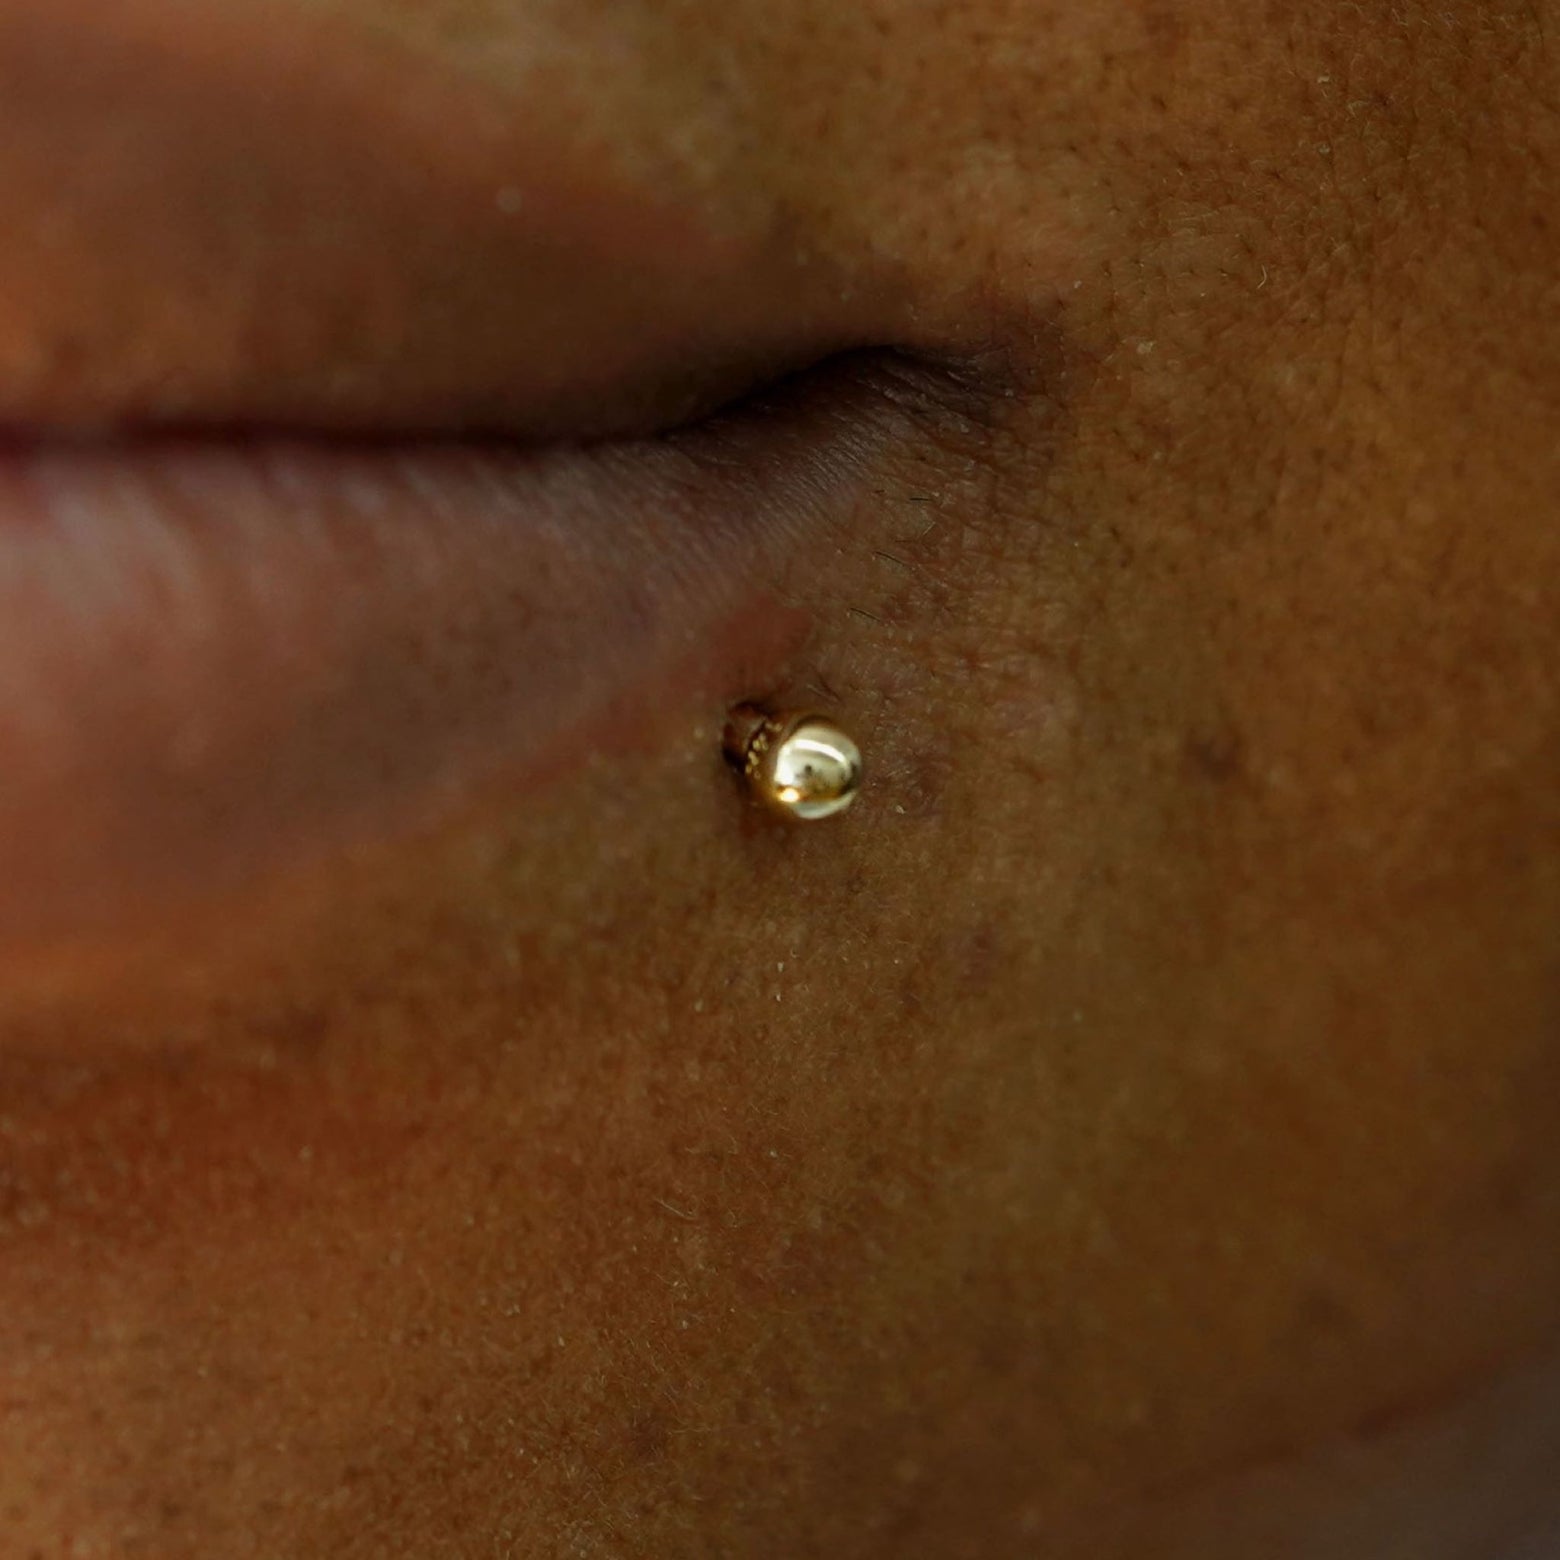 Close up view of a model wearing a yellow gold Small Labret Piercing under the left side of their lip